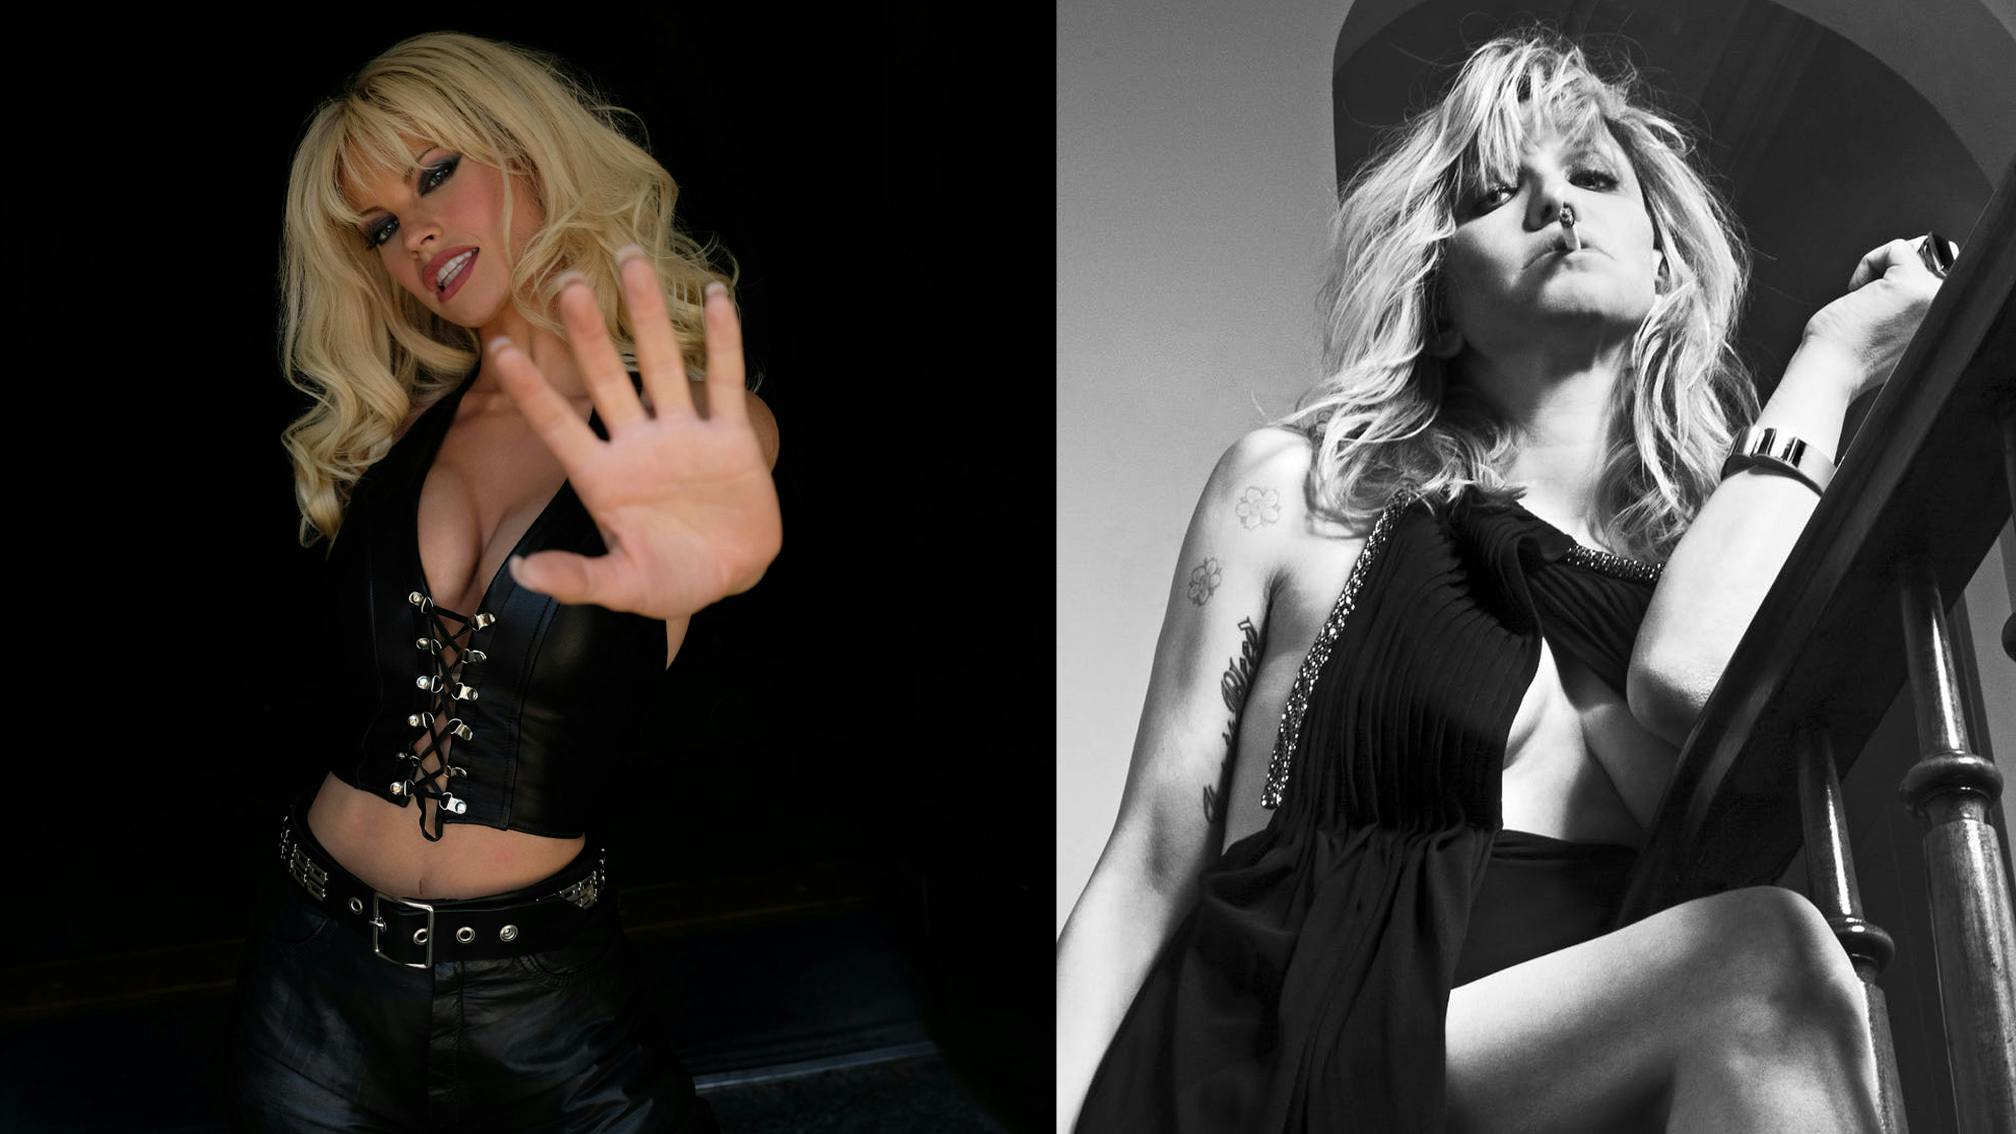 Courtney Love slams "f*cking outrageous" Pam & Tommy TV series